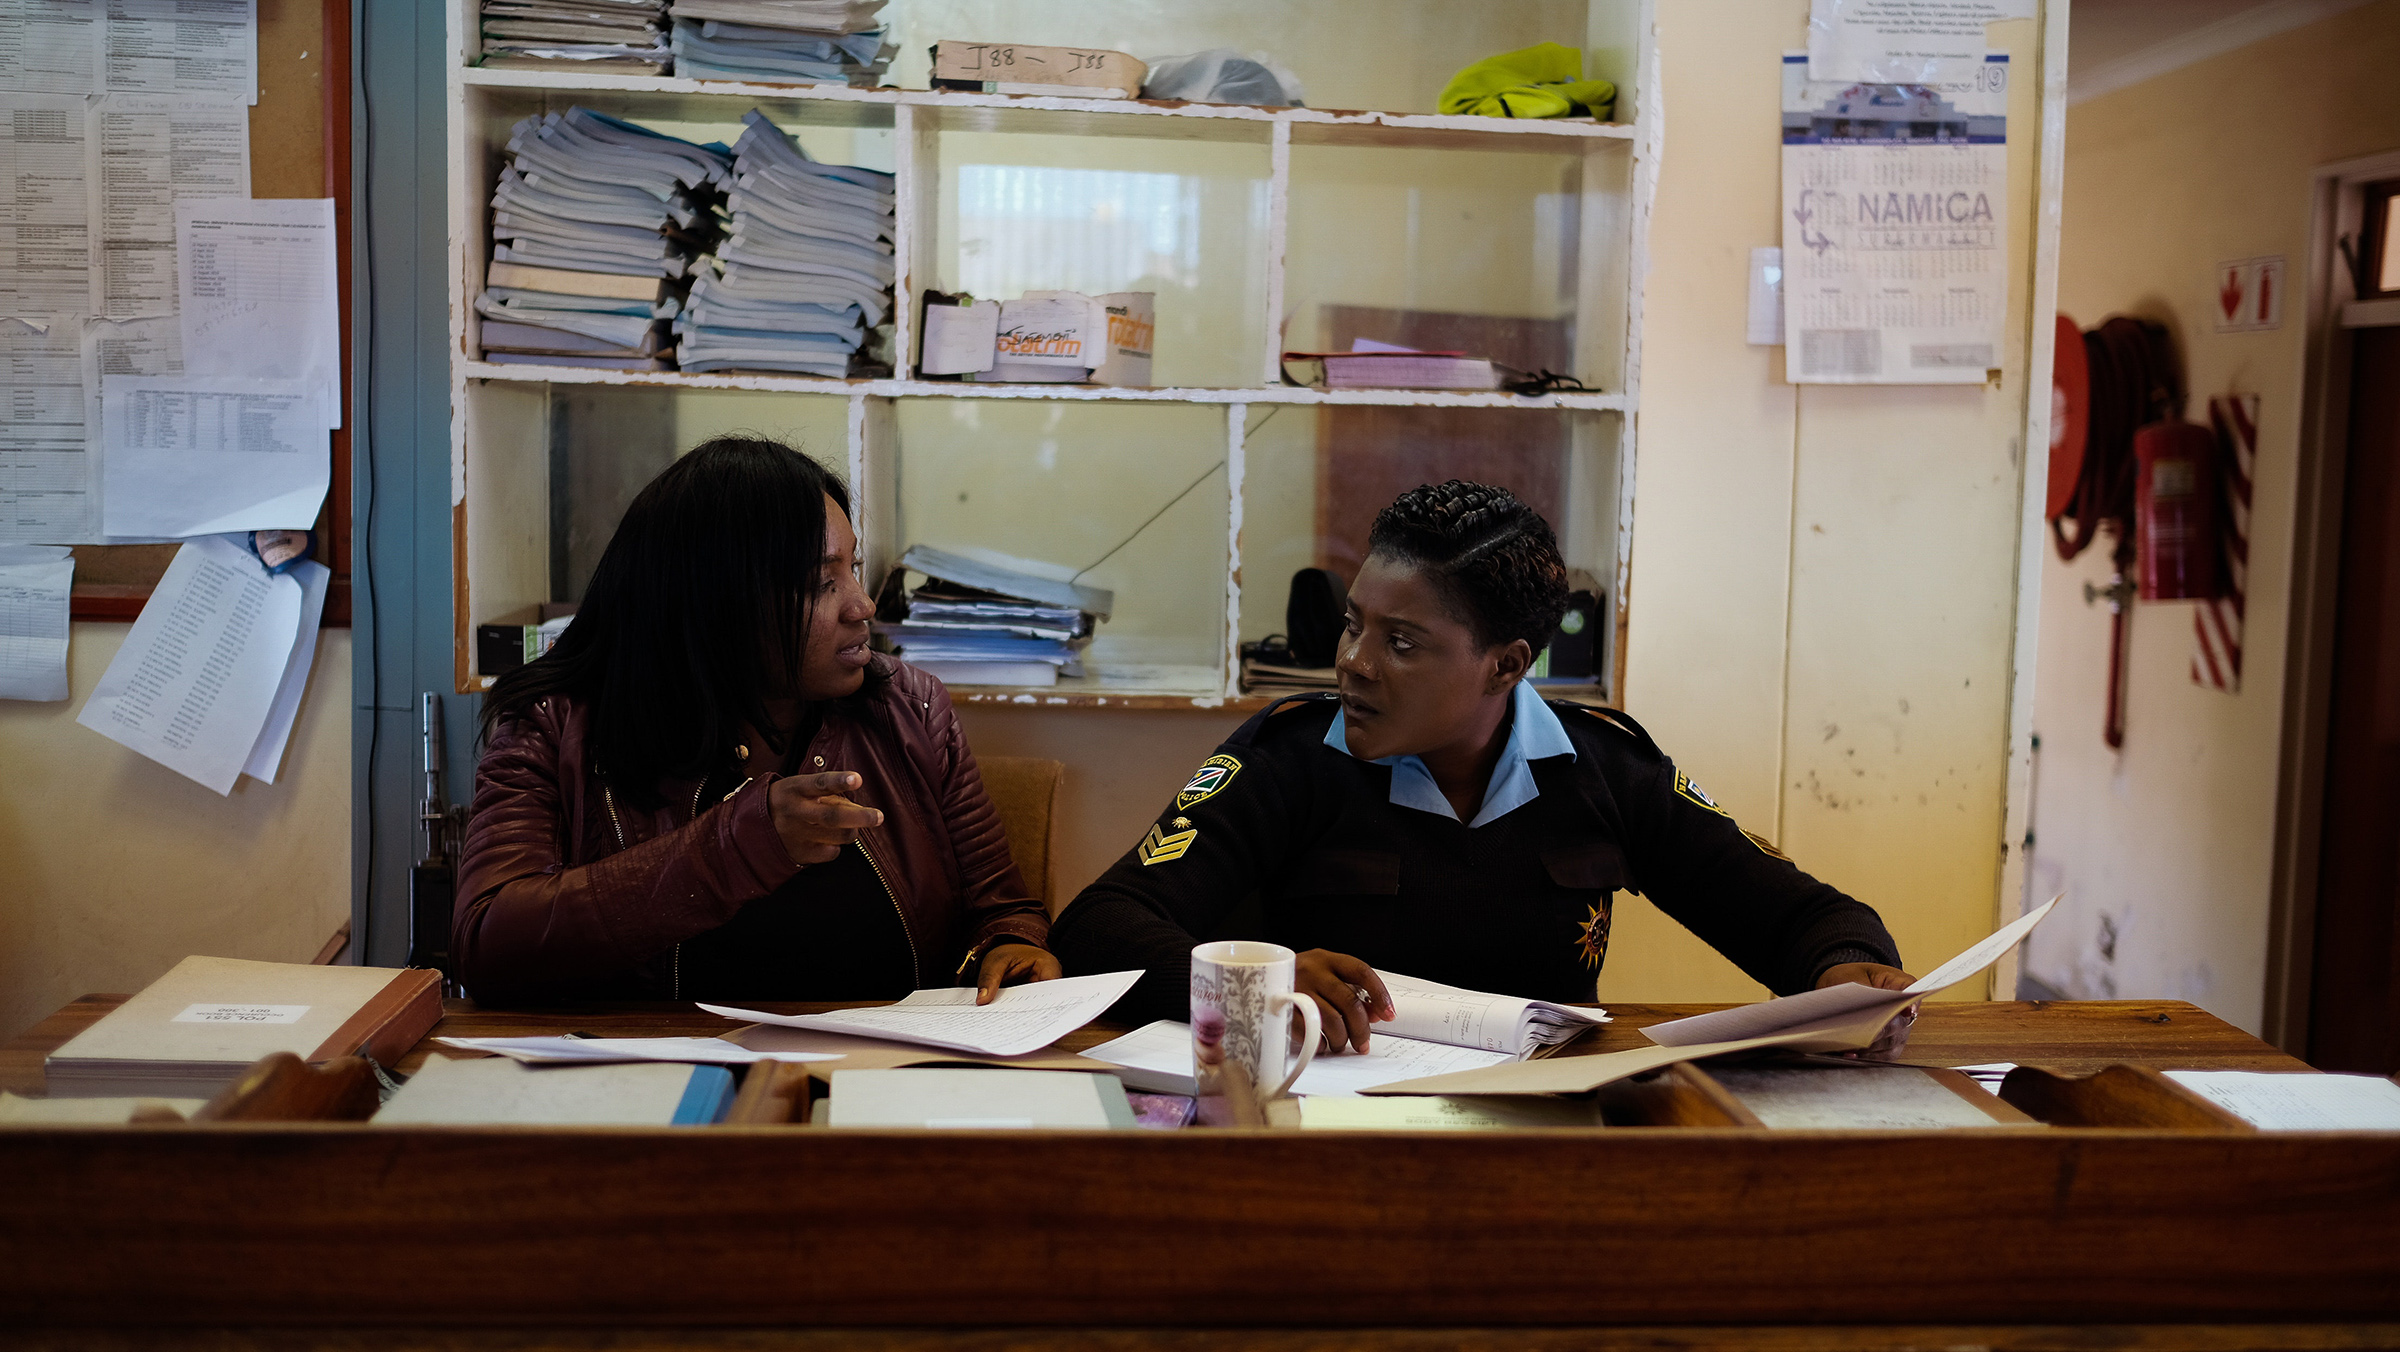 Gender-based Violence Unit Detective Gabriella and Officer Hagatora talk about a possible suspect for a rape case at the Katatura Police Station in Windhoek, Namibia in the summer of 2019. (Asha Stuart/GroundTruth Project)